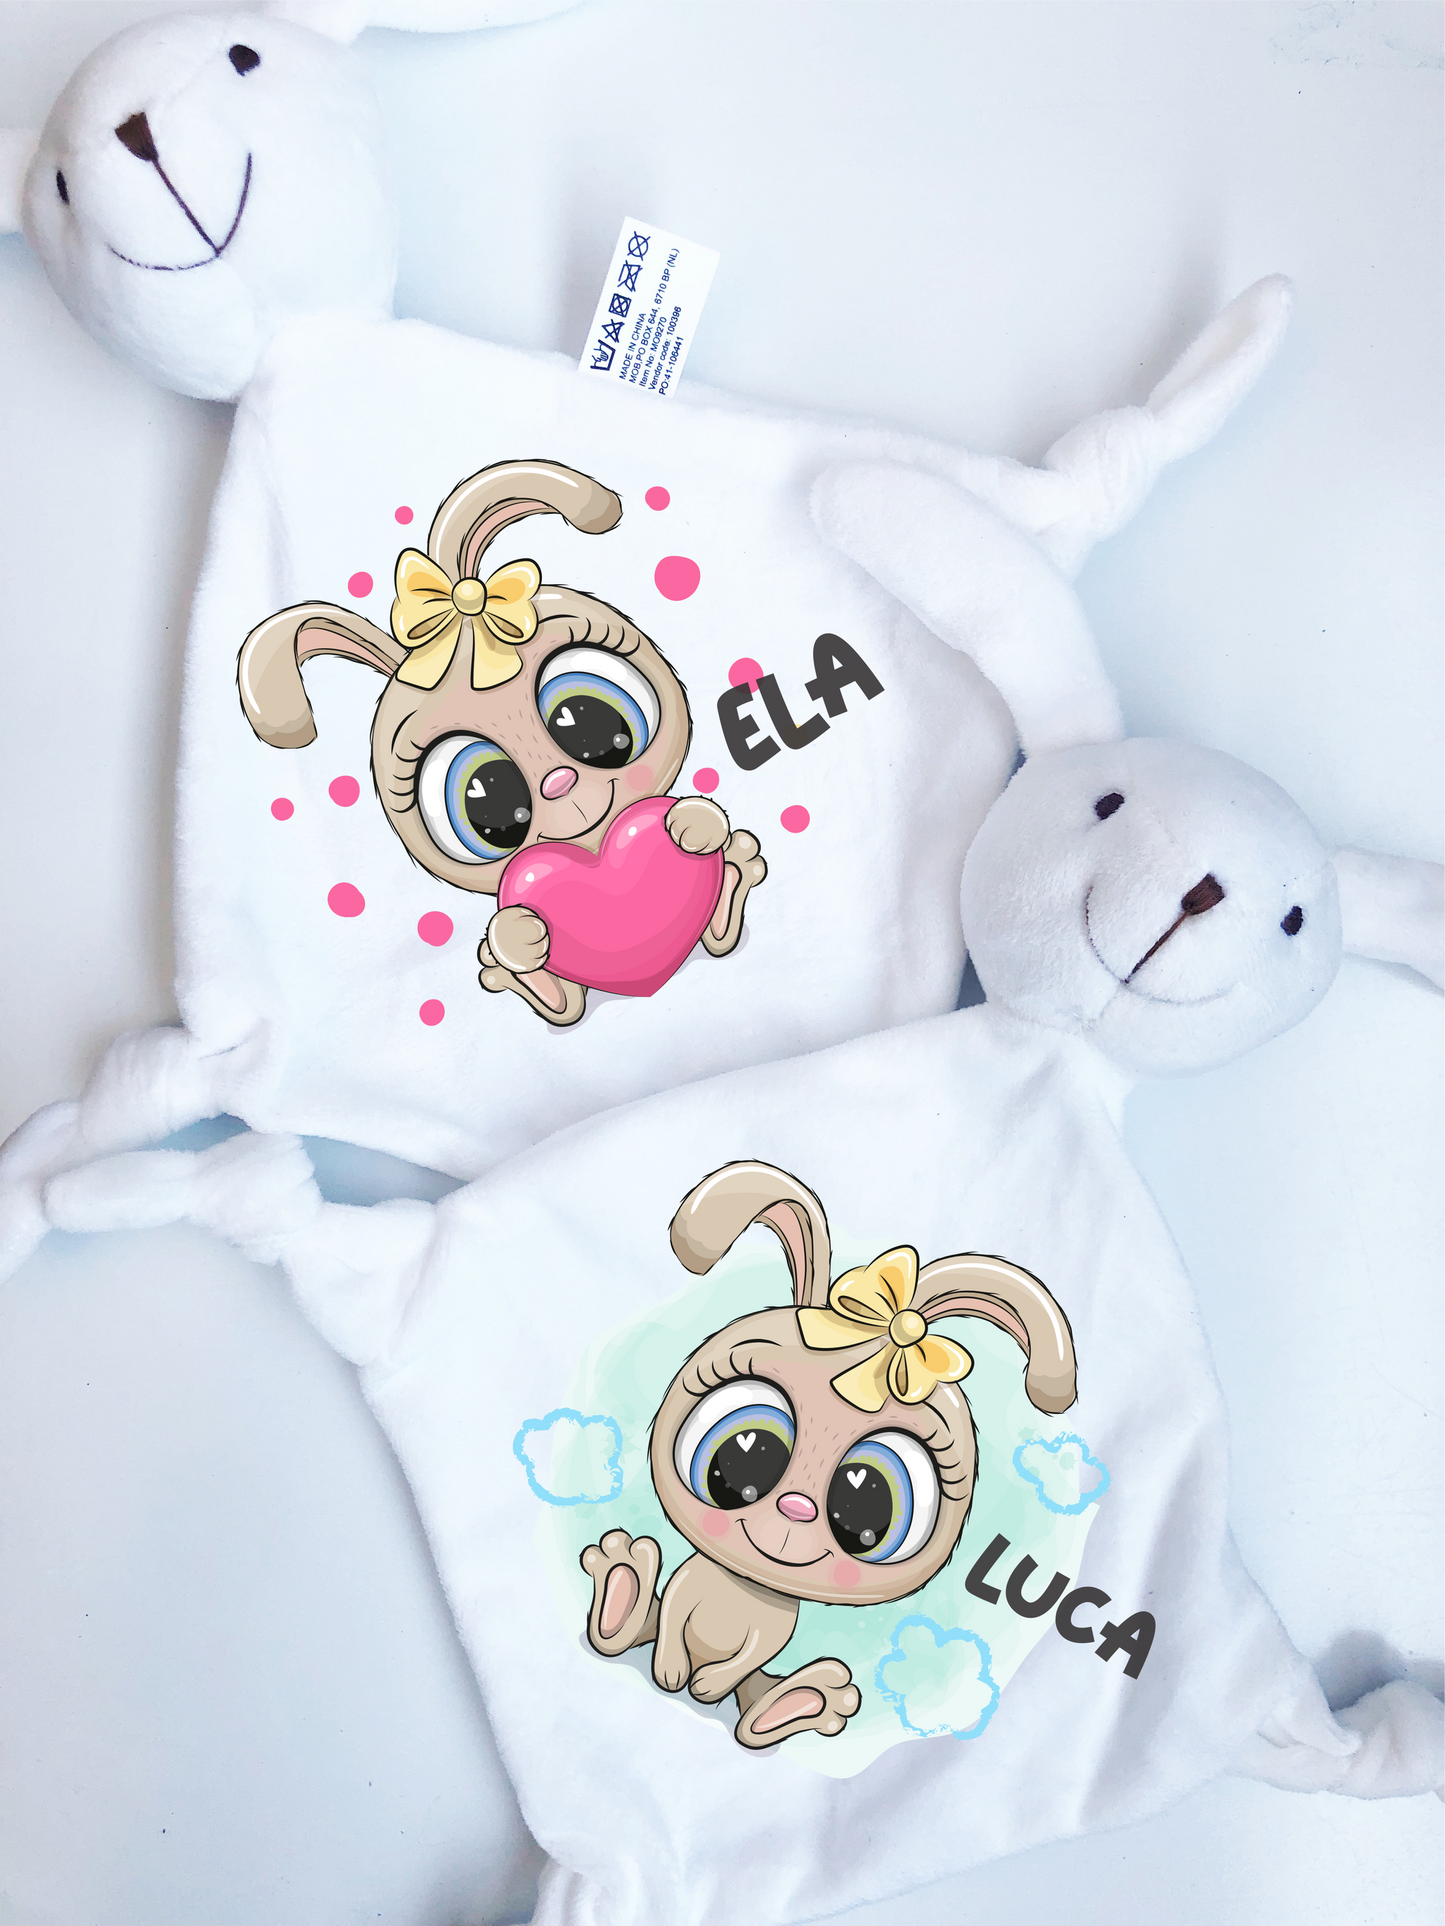 Get trendy with Personalized BABY CUDDLY TOY-rabbit design. -  available at cutegifts.eu. Grab yours for $19.90 today!